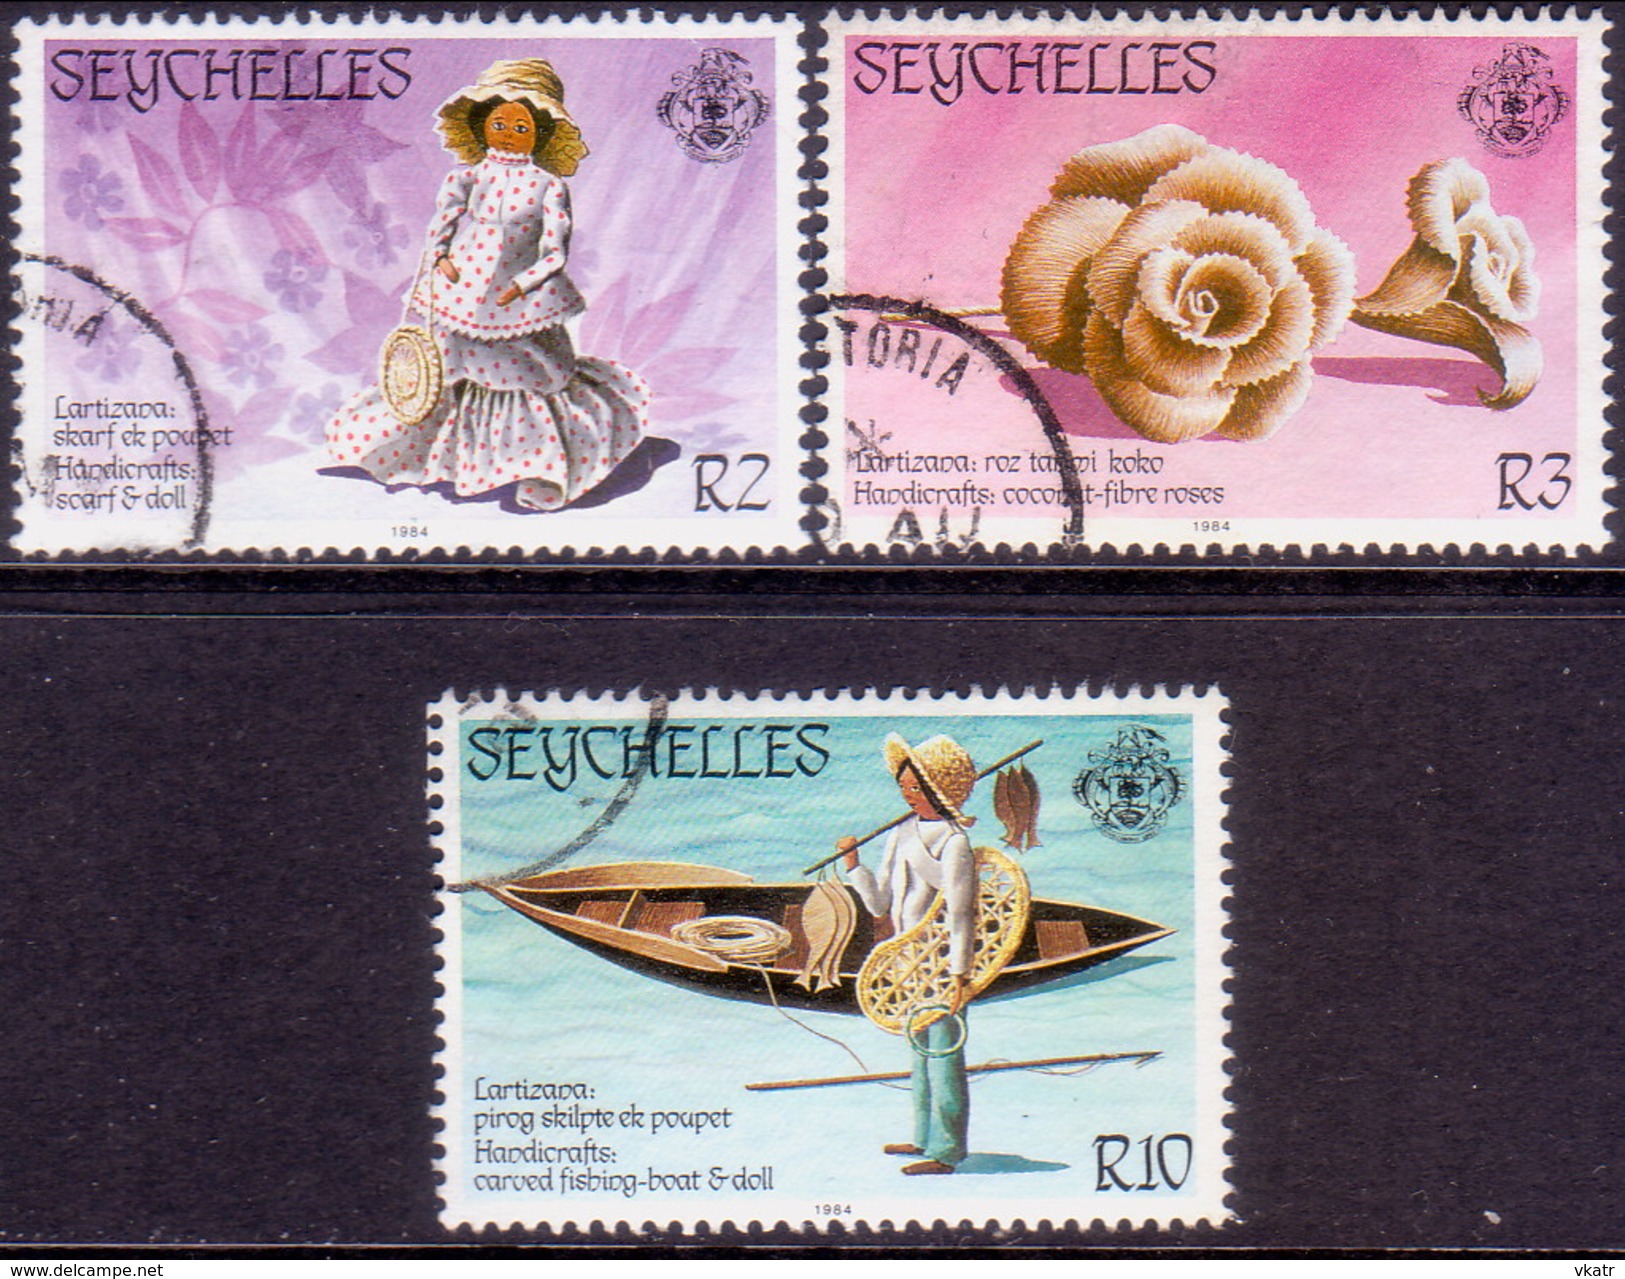 SEYCHELLES 1984 SG #580-82 Part Set Used Only 50c Stamp Missing Traditional Handicrafts - Seychelles (1976-...)